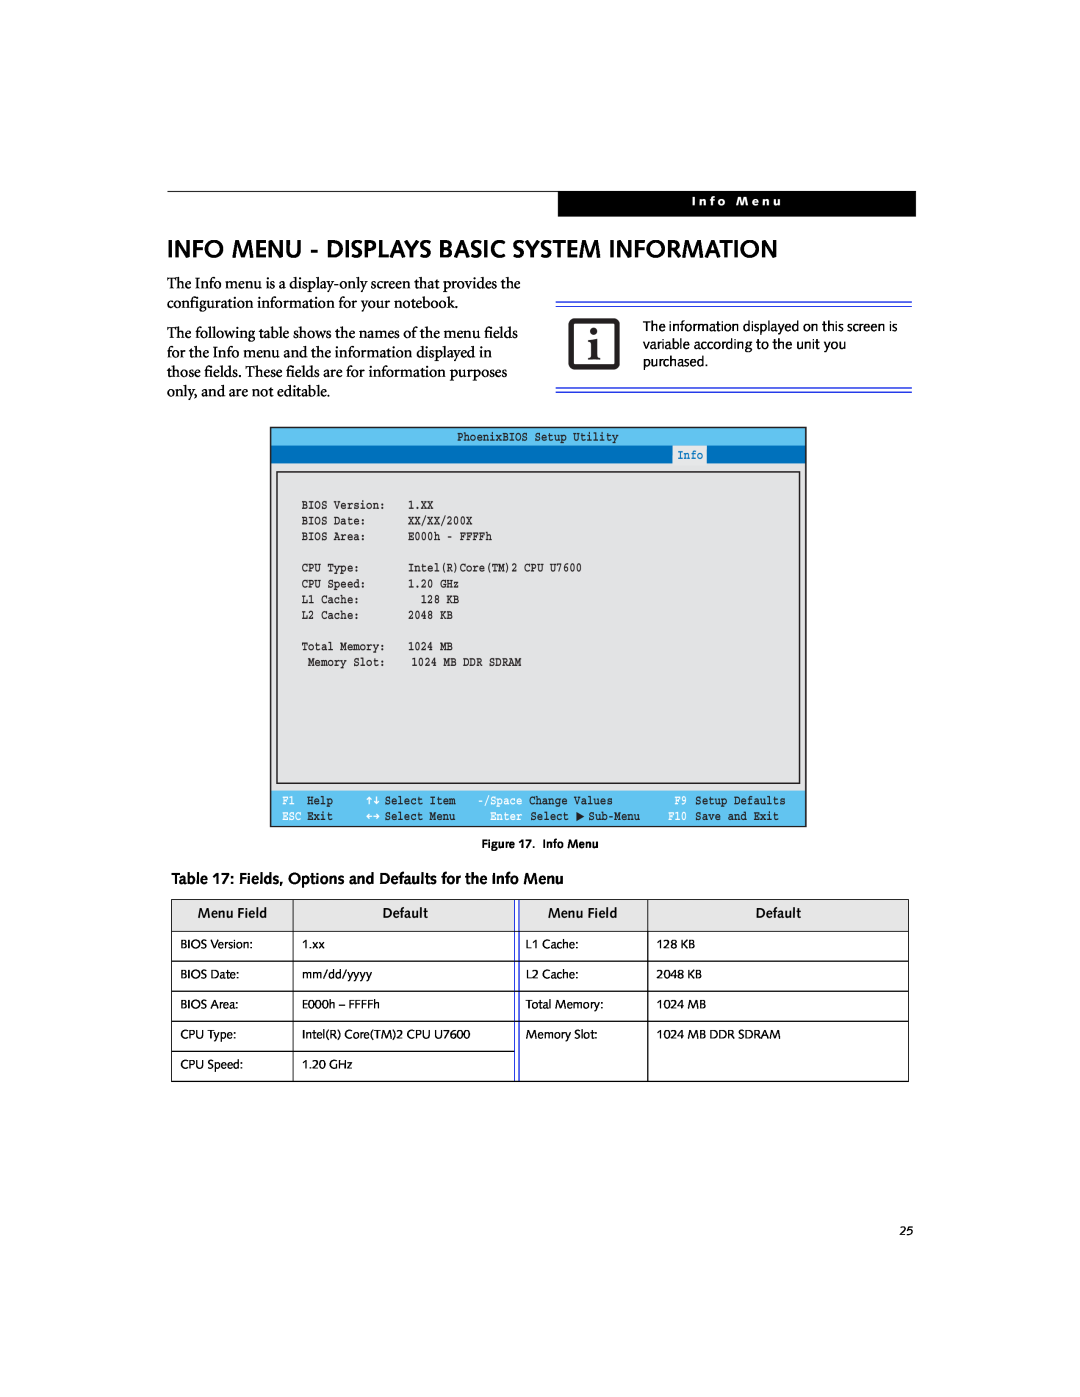 Fujitsu P1620 manual Info Menu - Displays Basic System Information, Fields, Options and Defaults for the Info Menu 